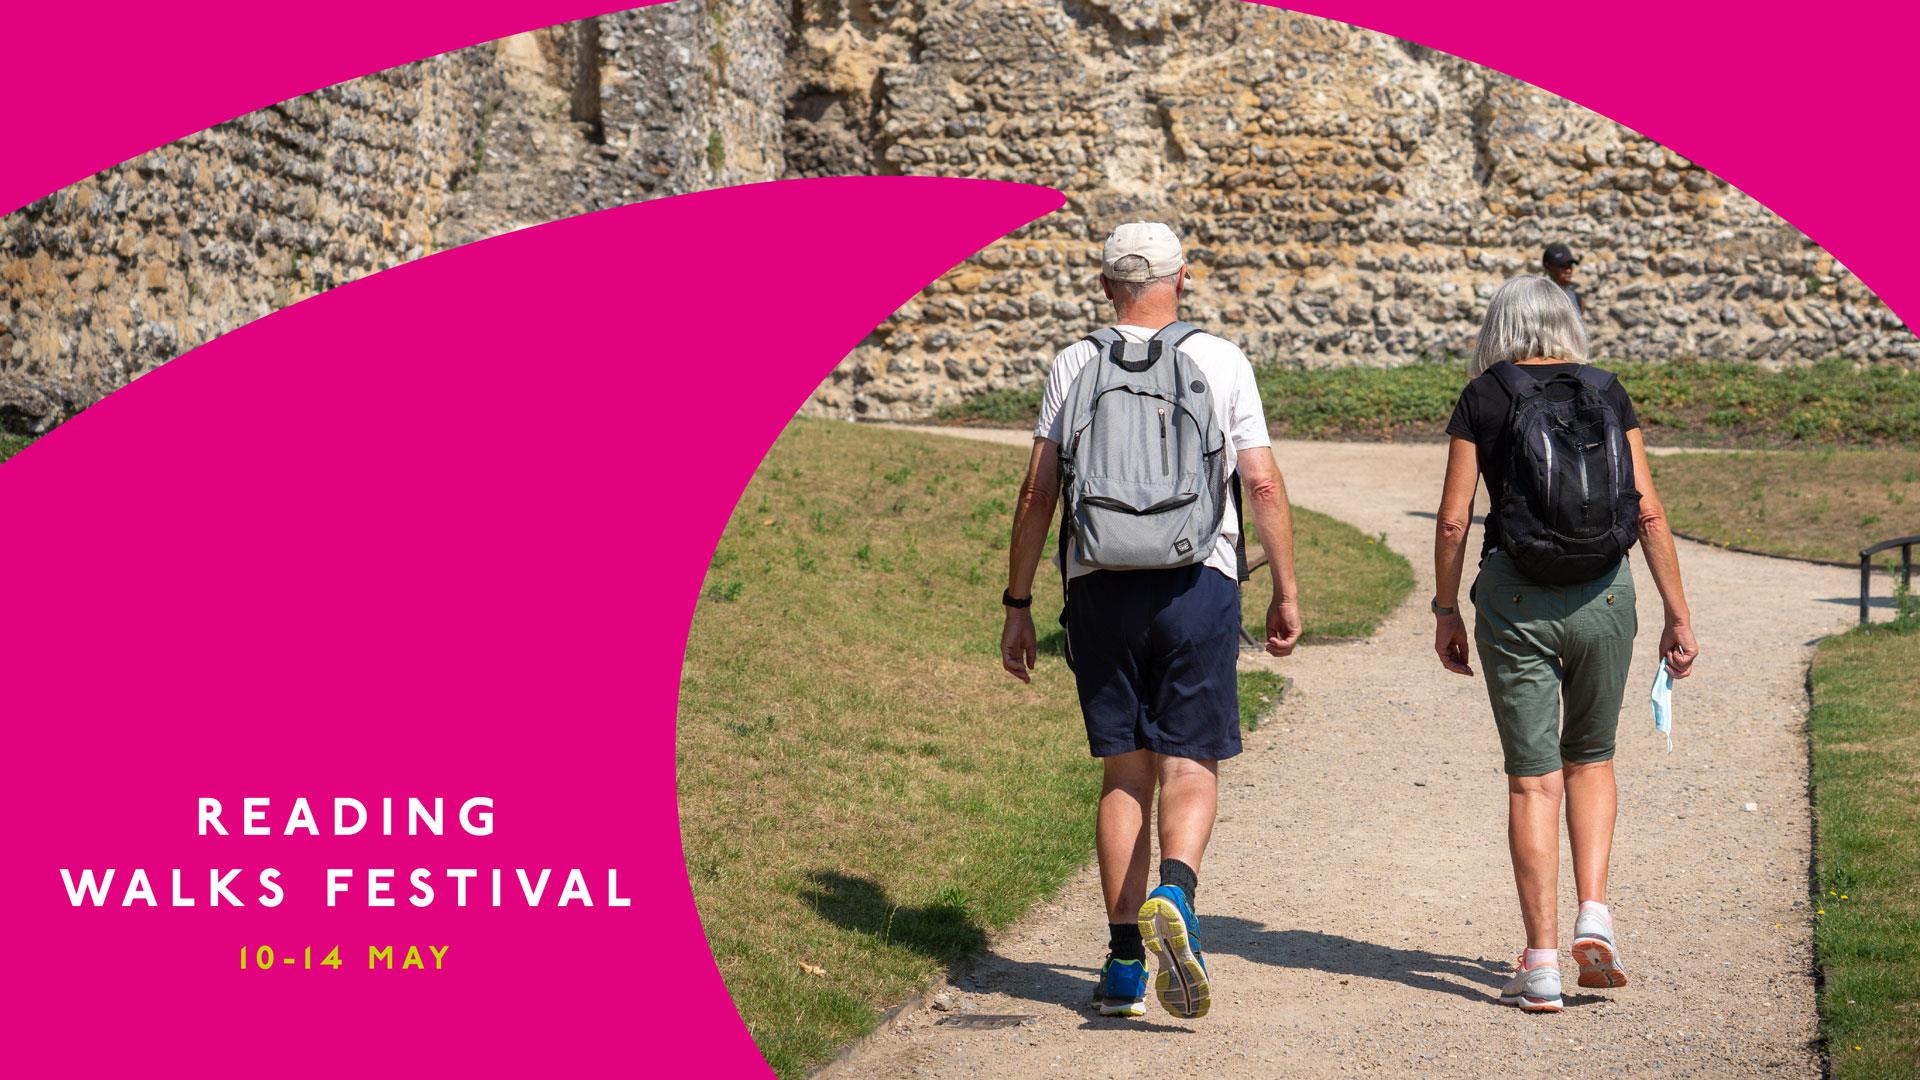 Reading Walks Festival header showing two people walking through Reading Abbey Ruins